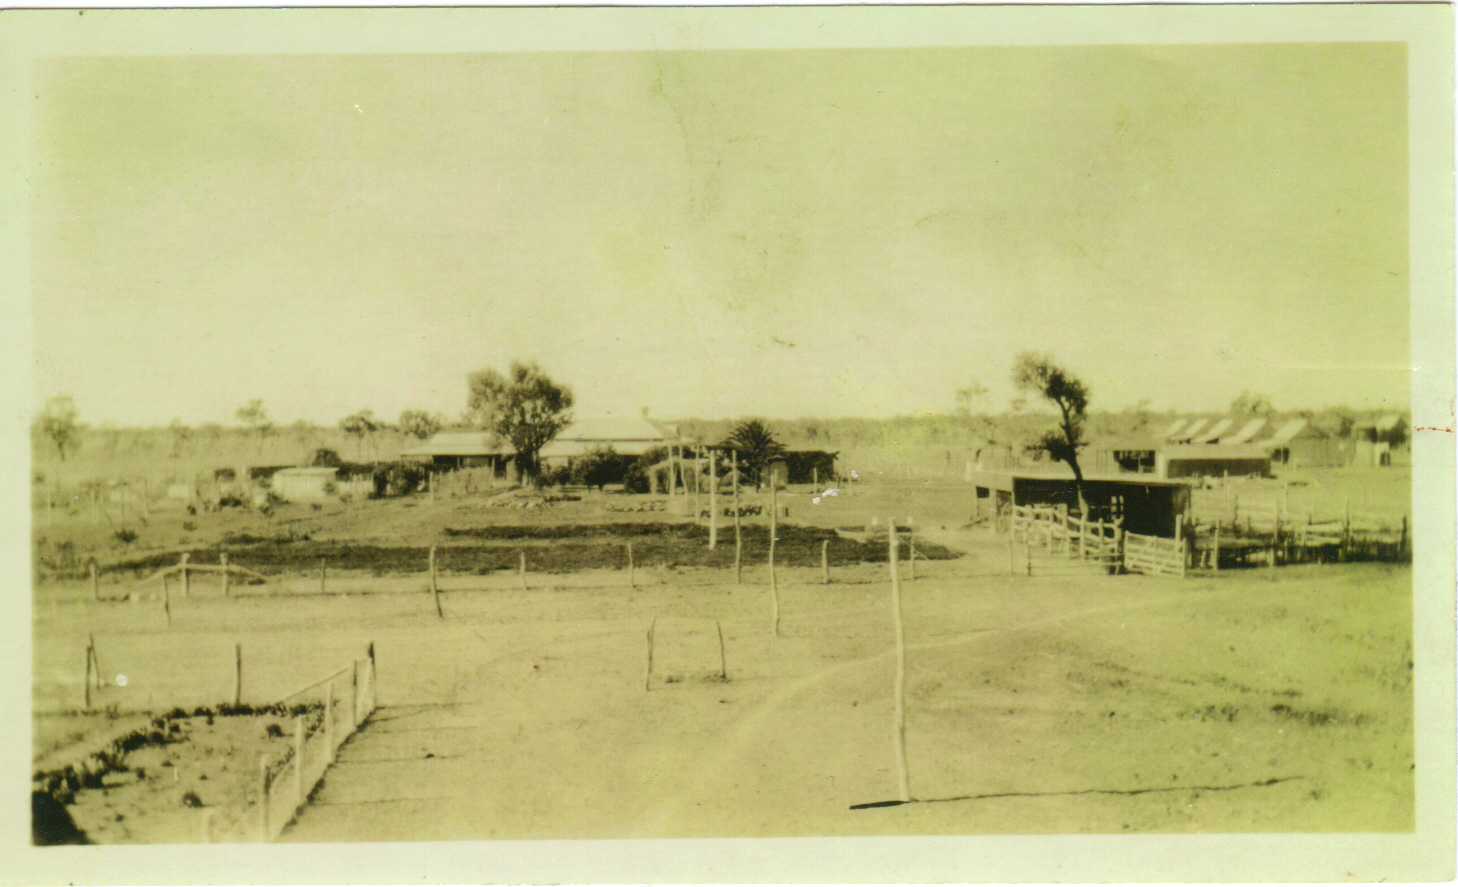 Black and white photo of the Brewarrina Mission